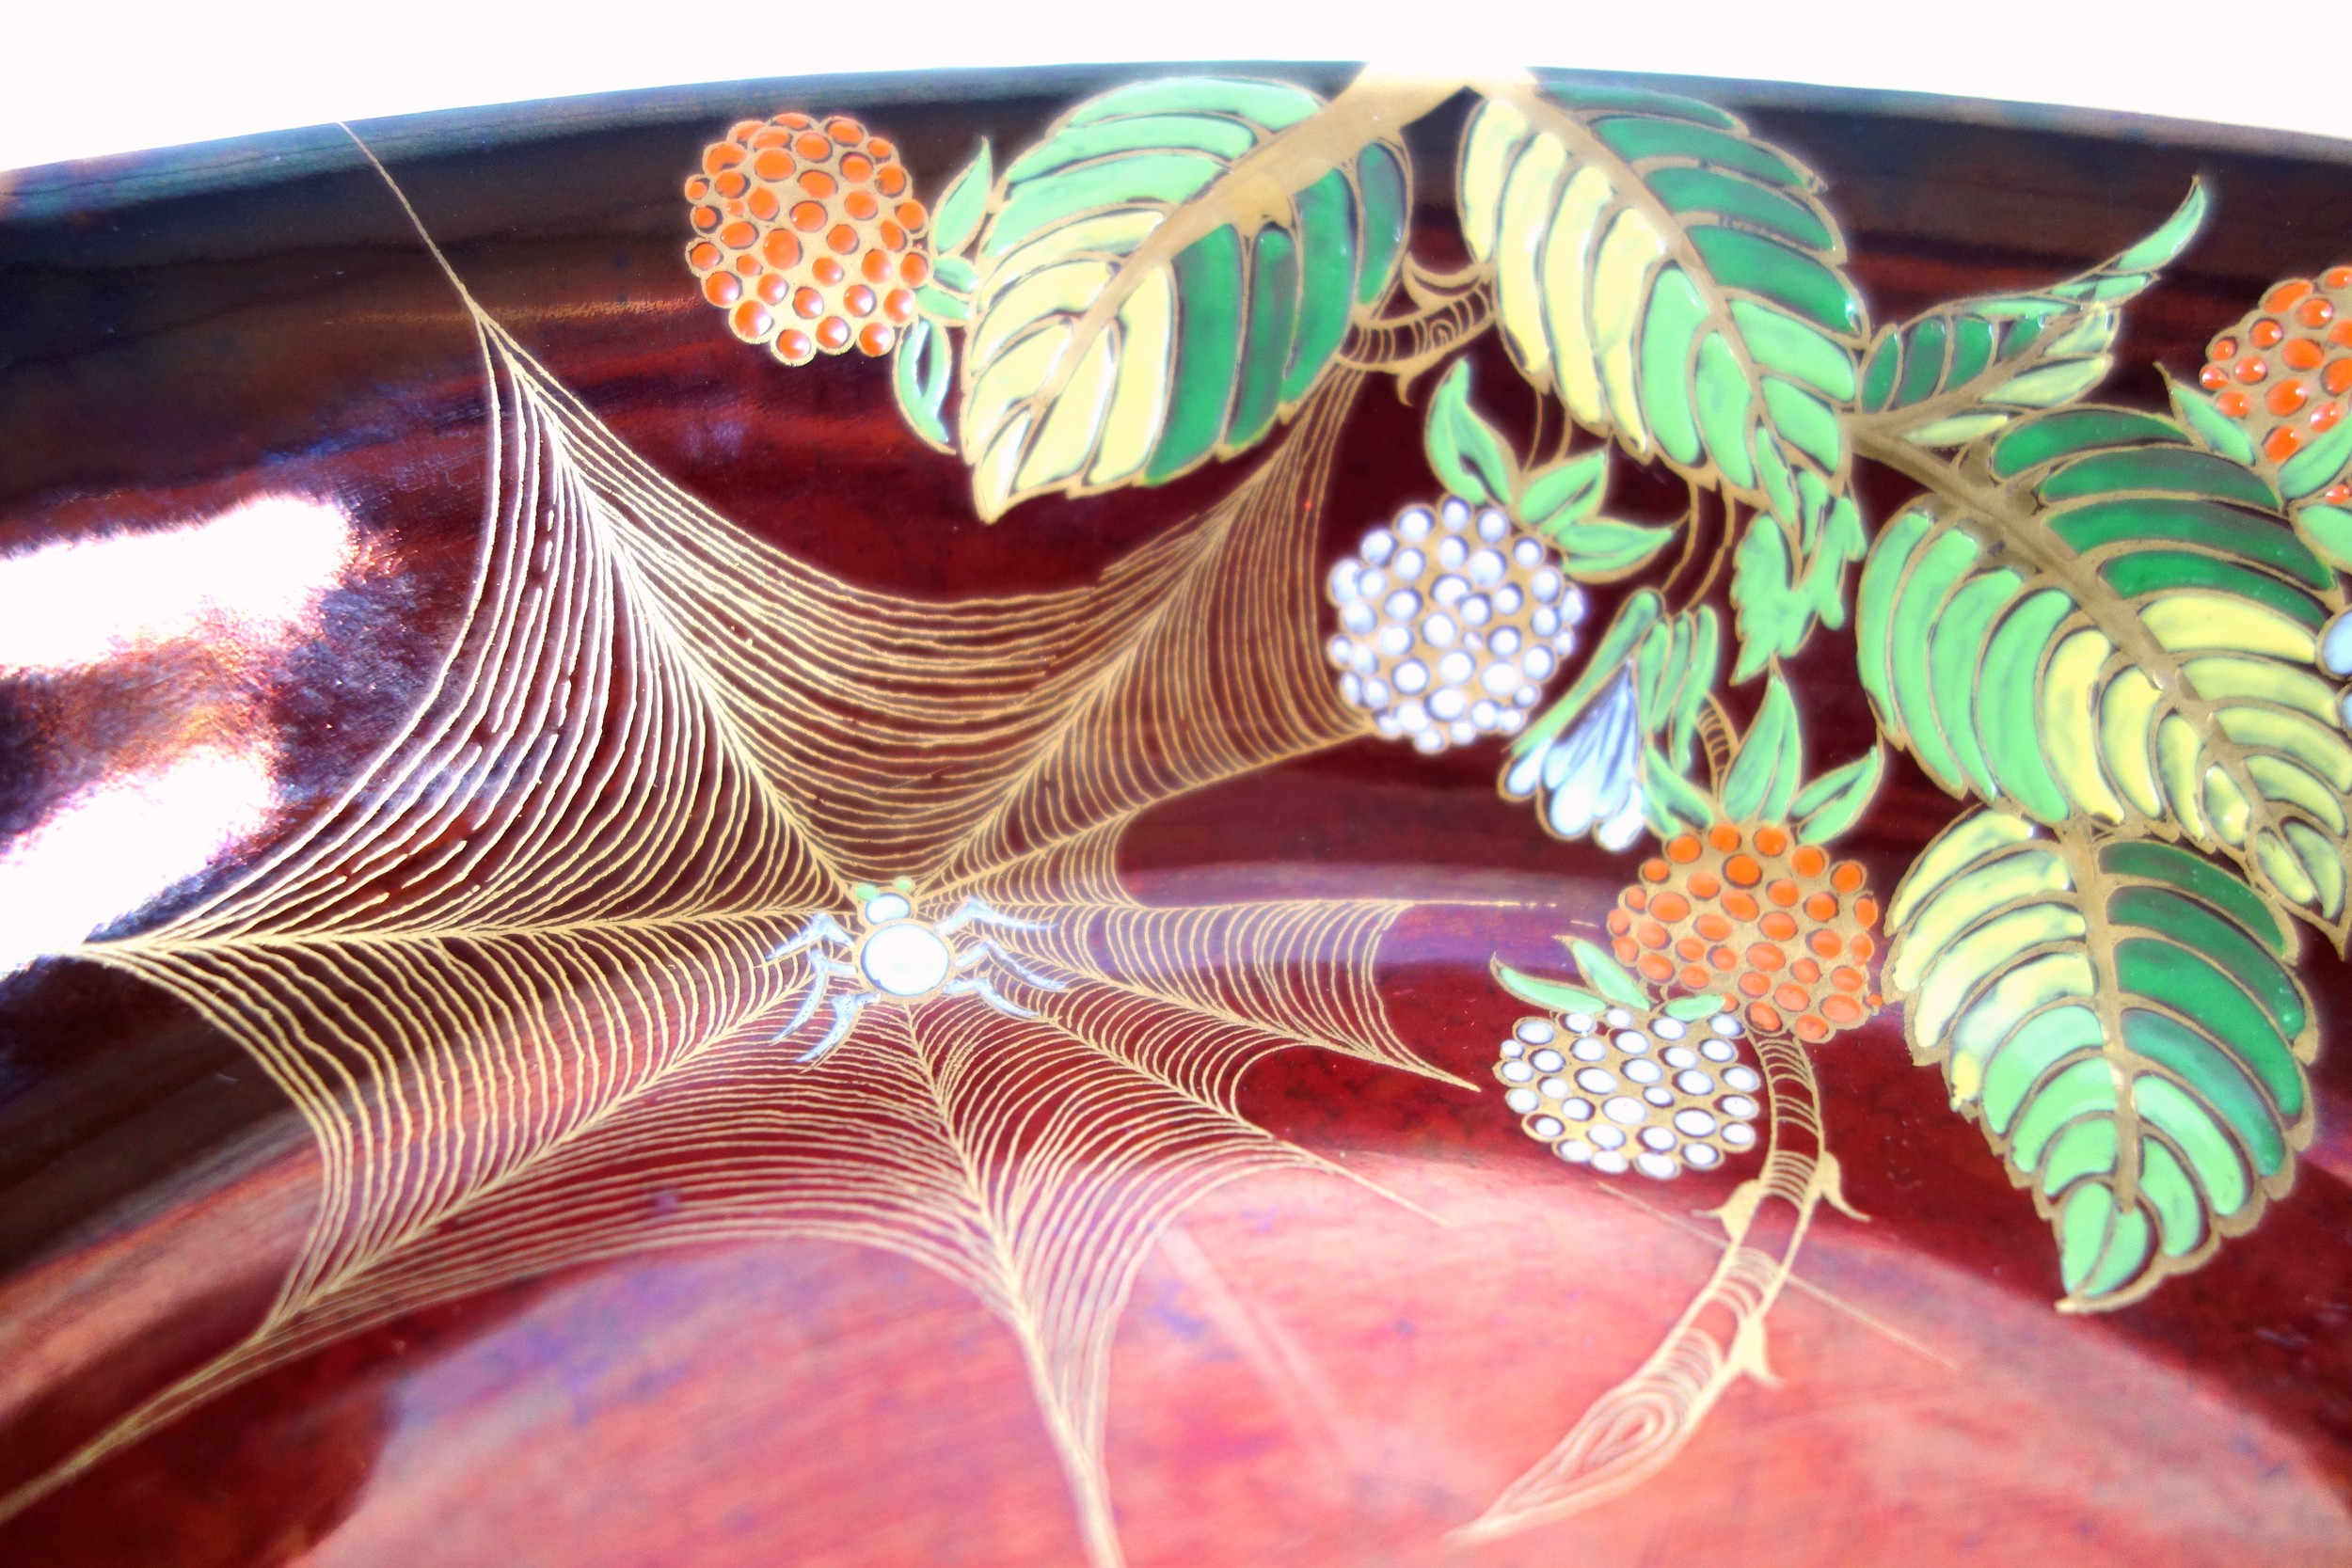 Carltonware Spider web and dragonfly design bowl, from the Rouge Royale series, 25.5cm diameter. - Image 3 of 6